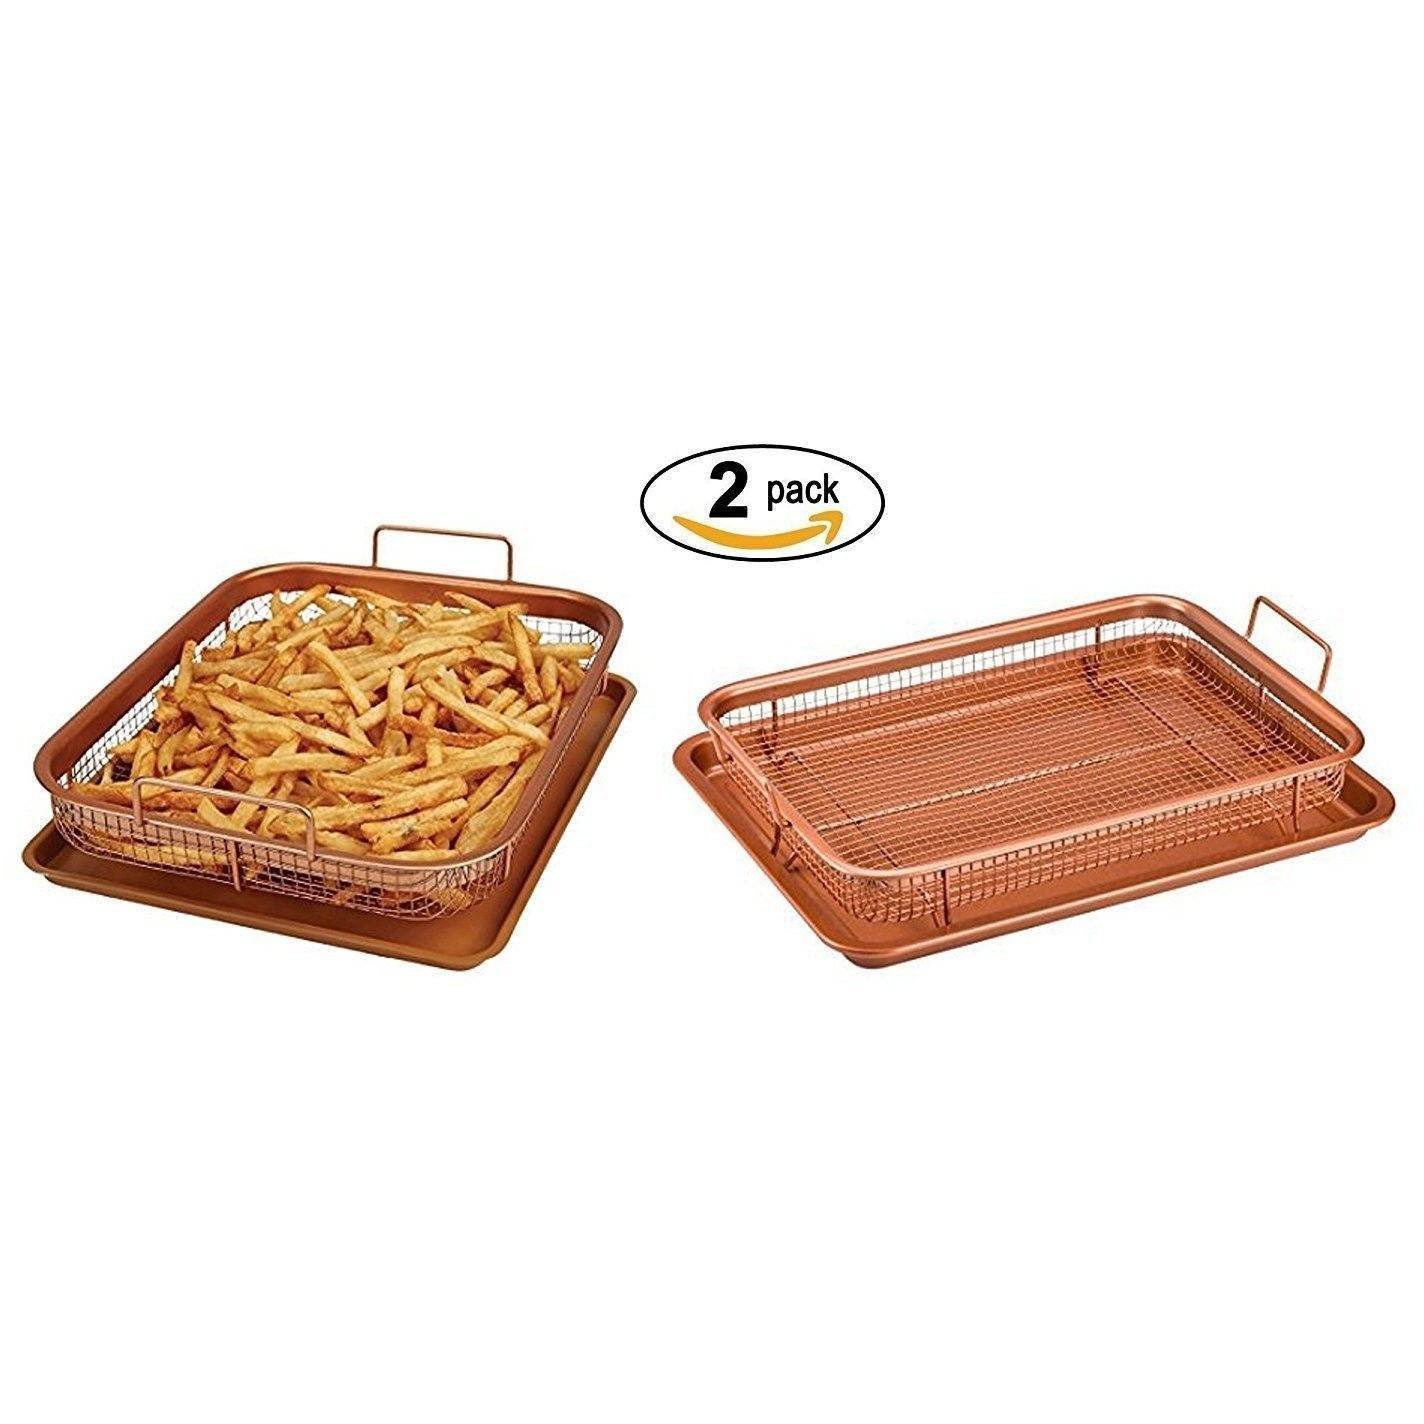 2 Pack Copper Baking Tray Air Fryer 